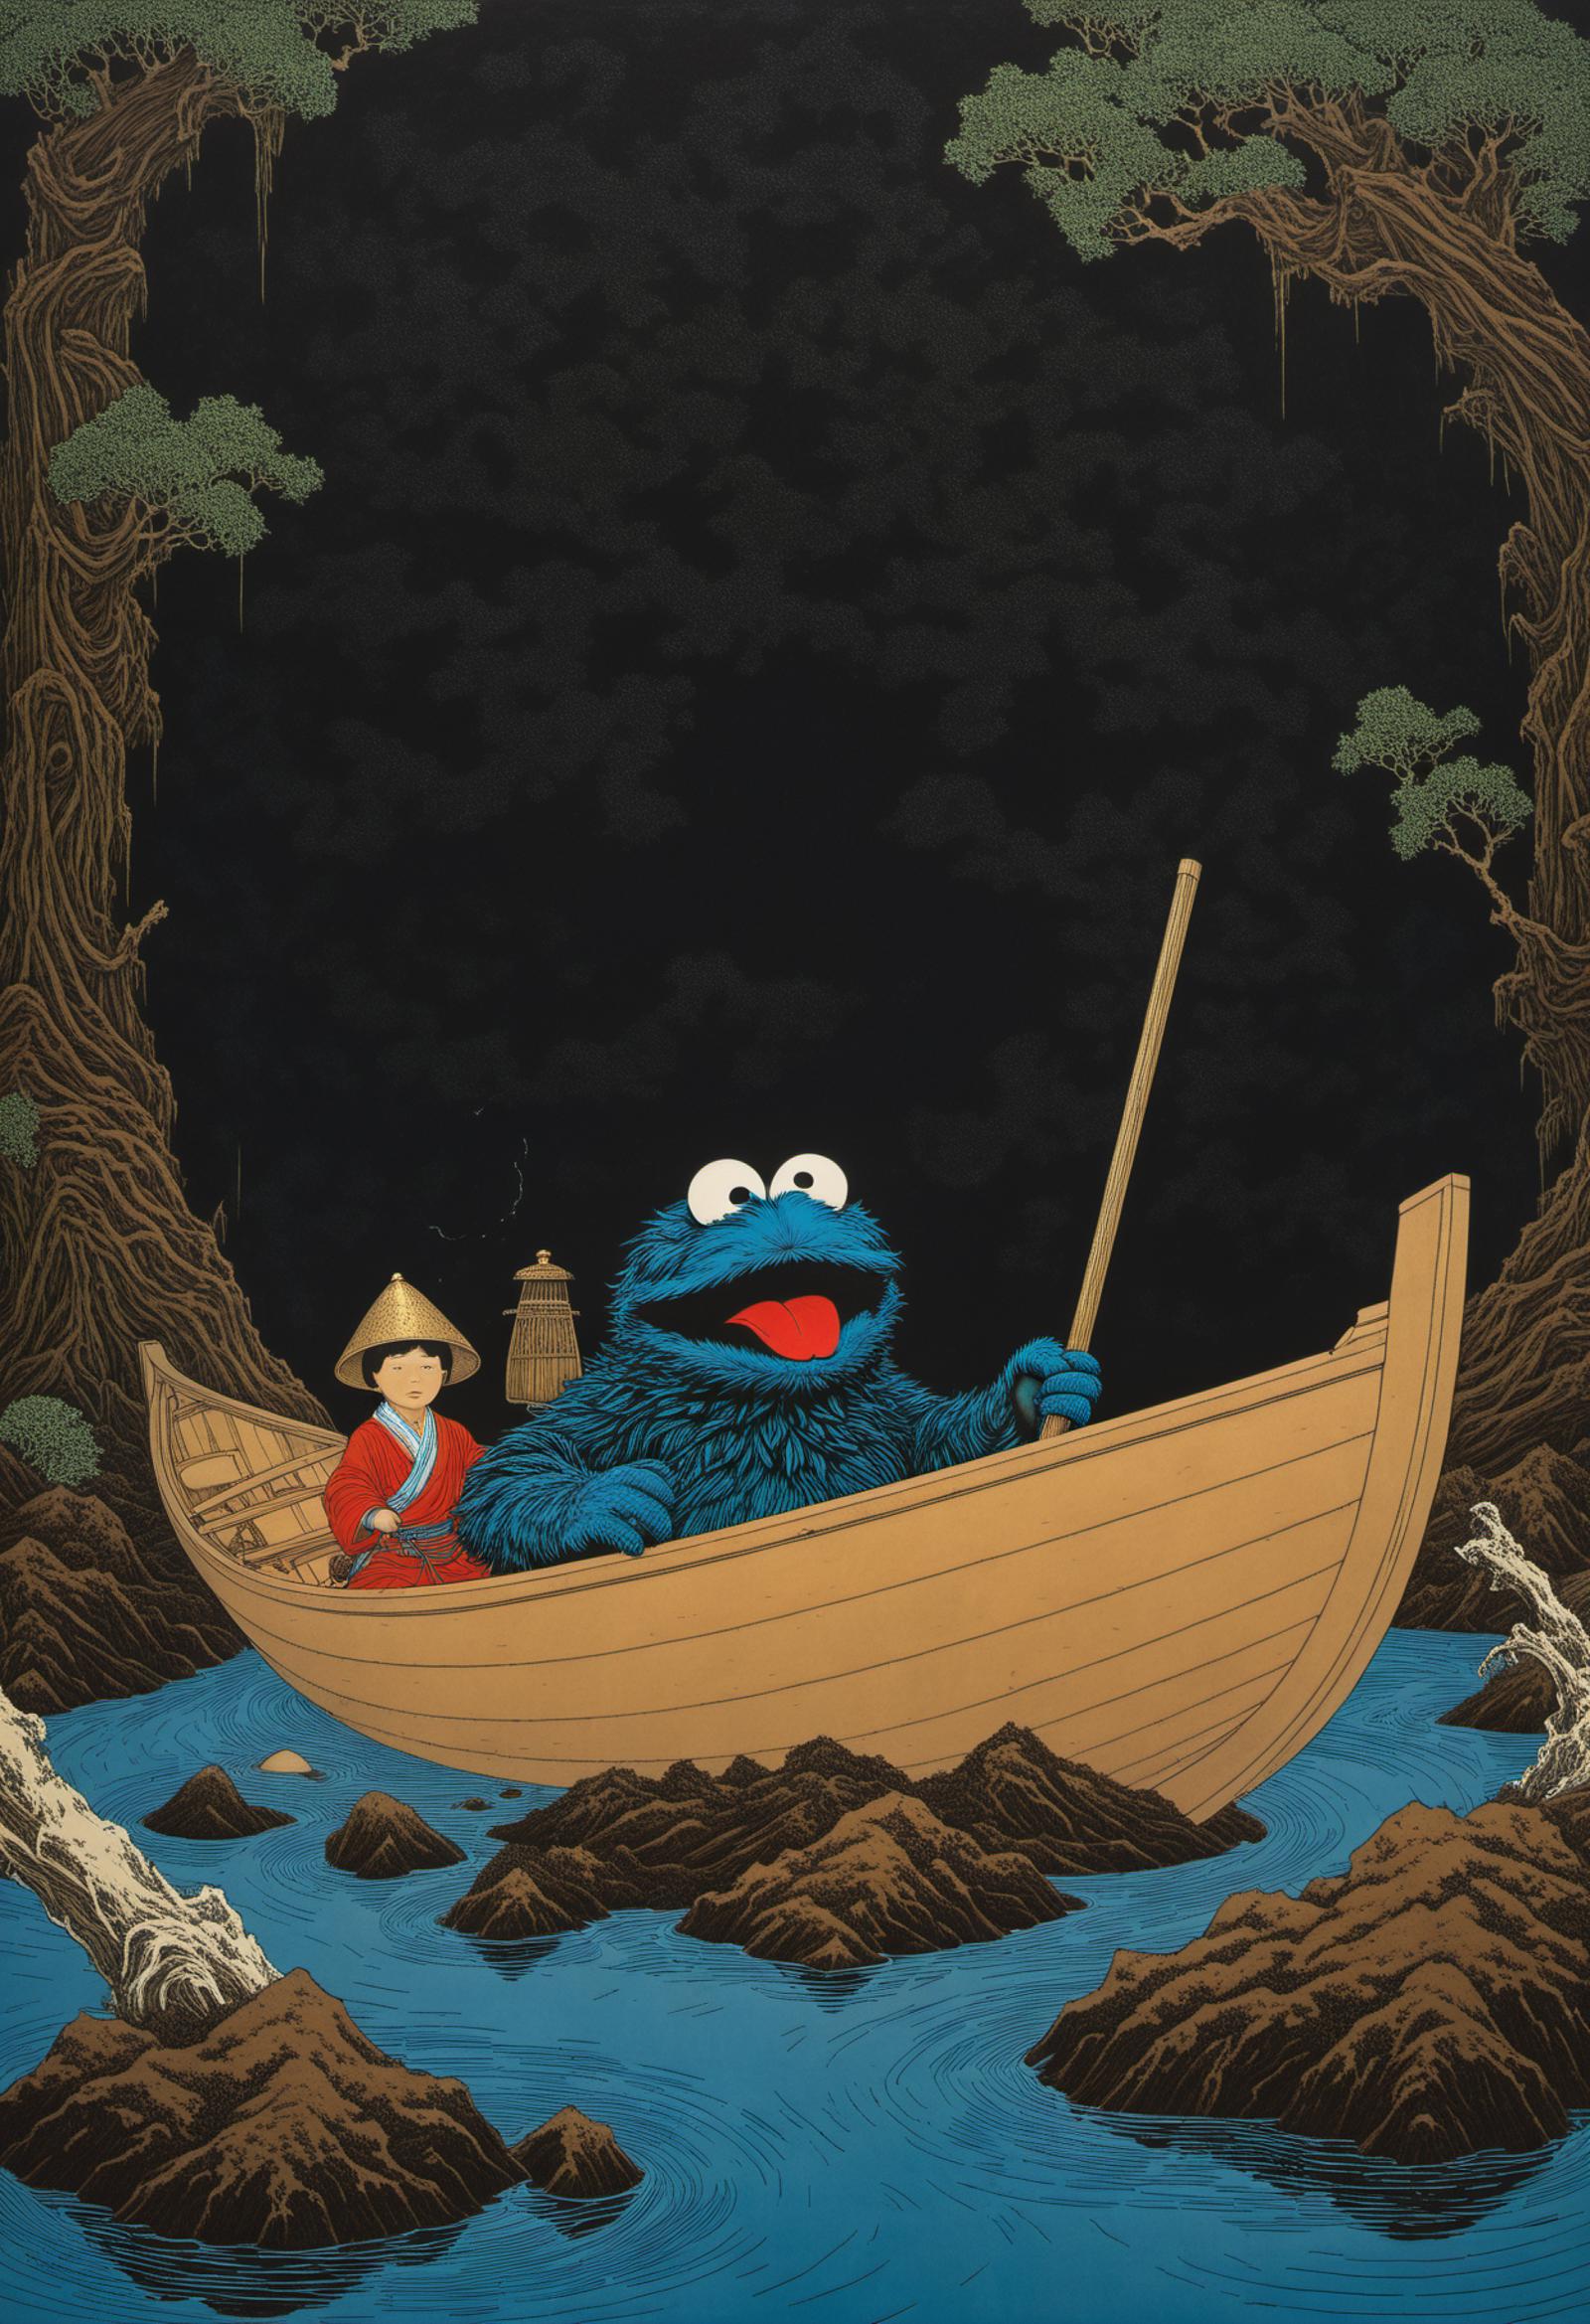 A cartoon picture of a giant blue monster, Big Bird, and a child in a boat.